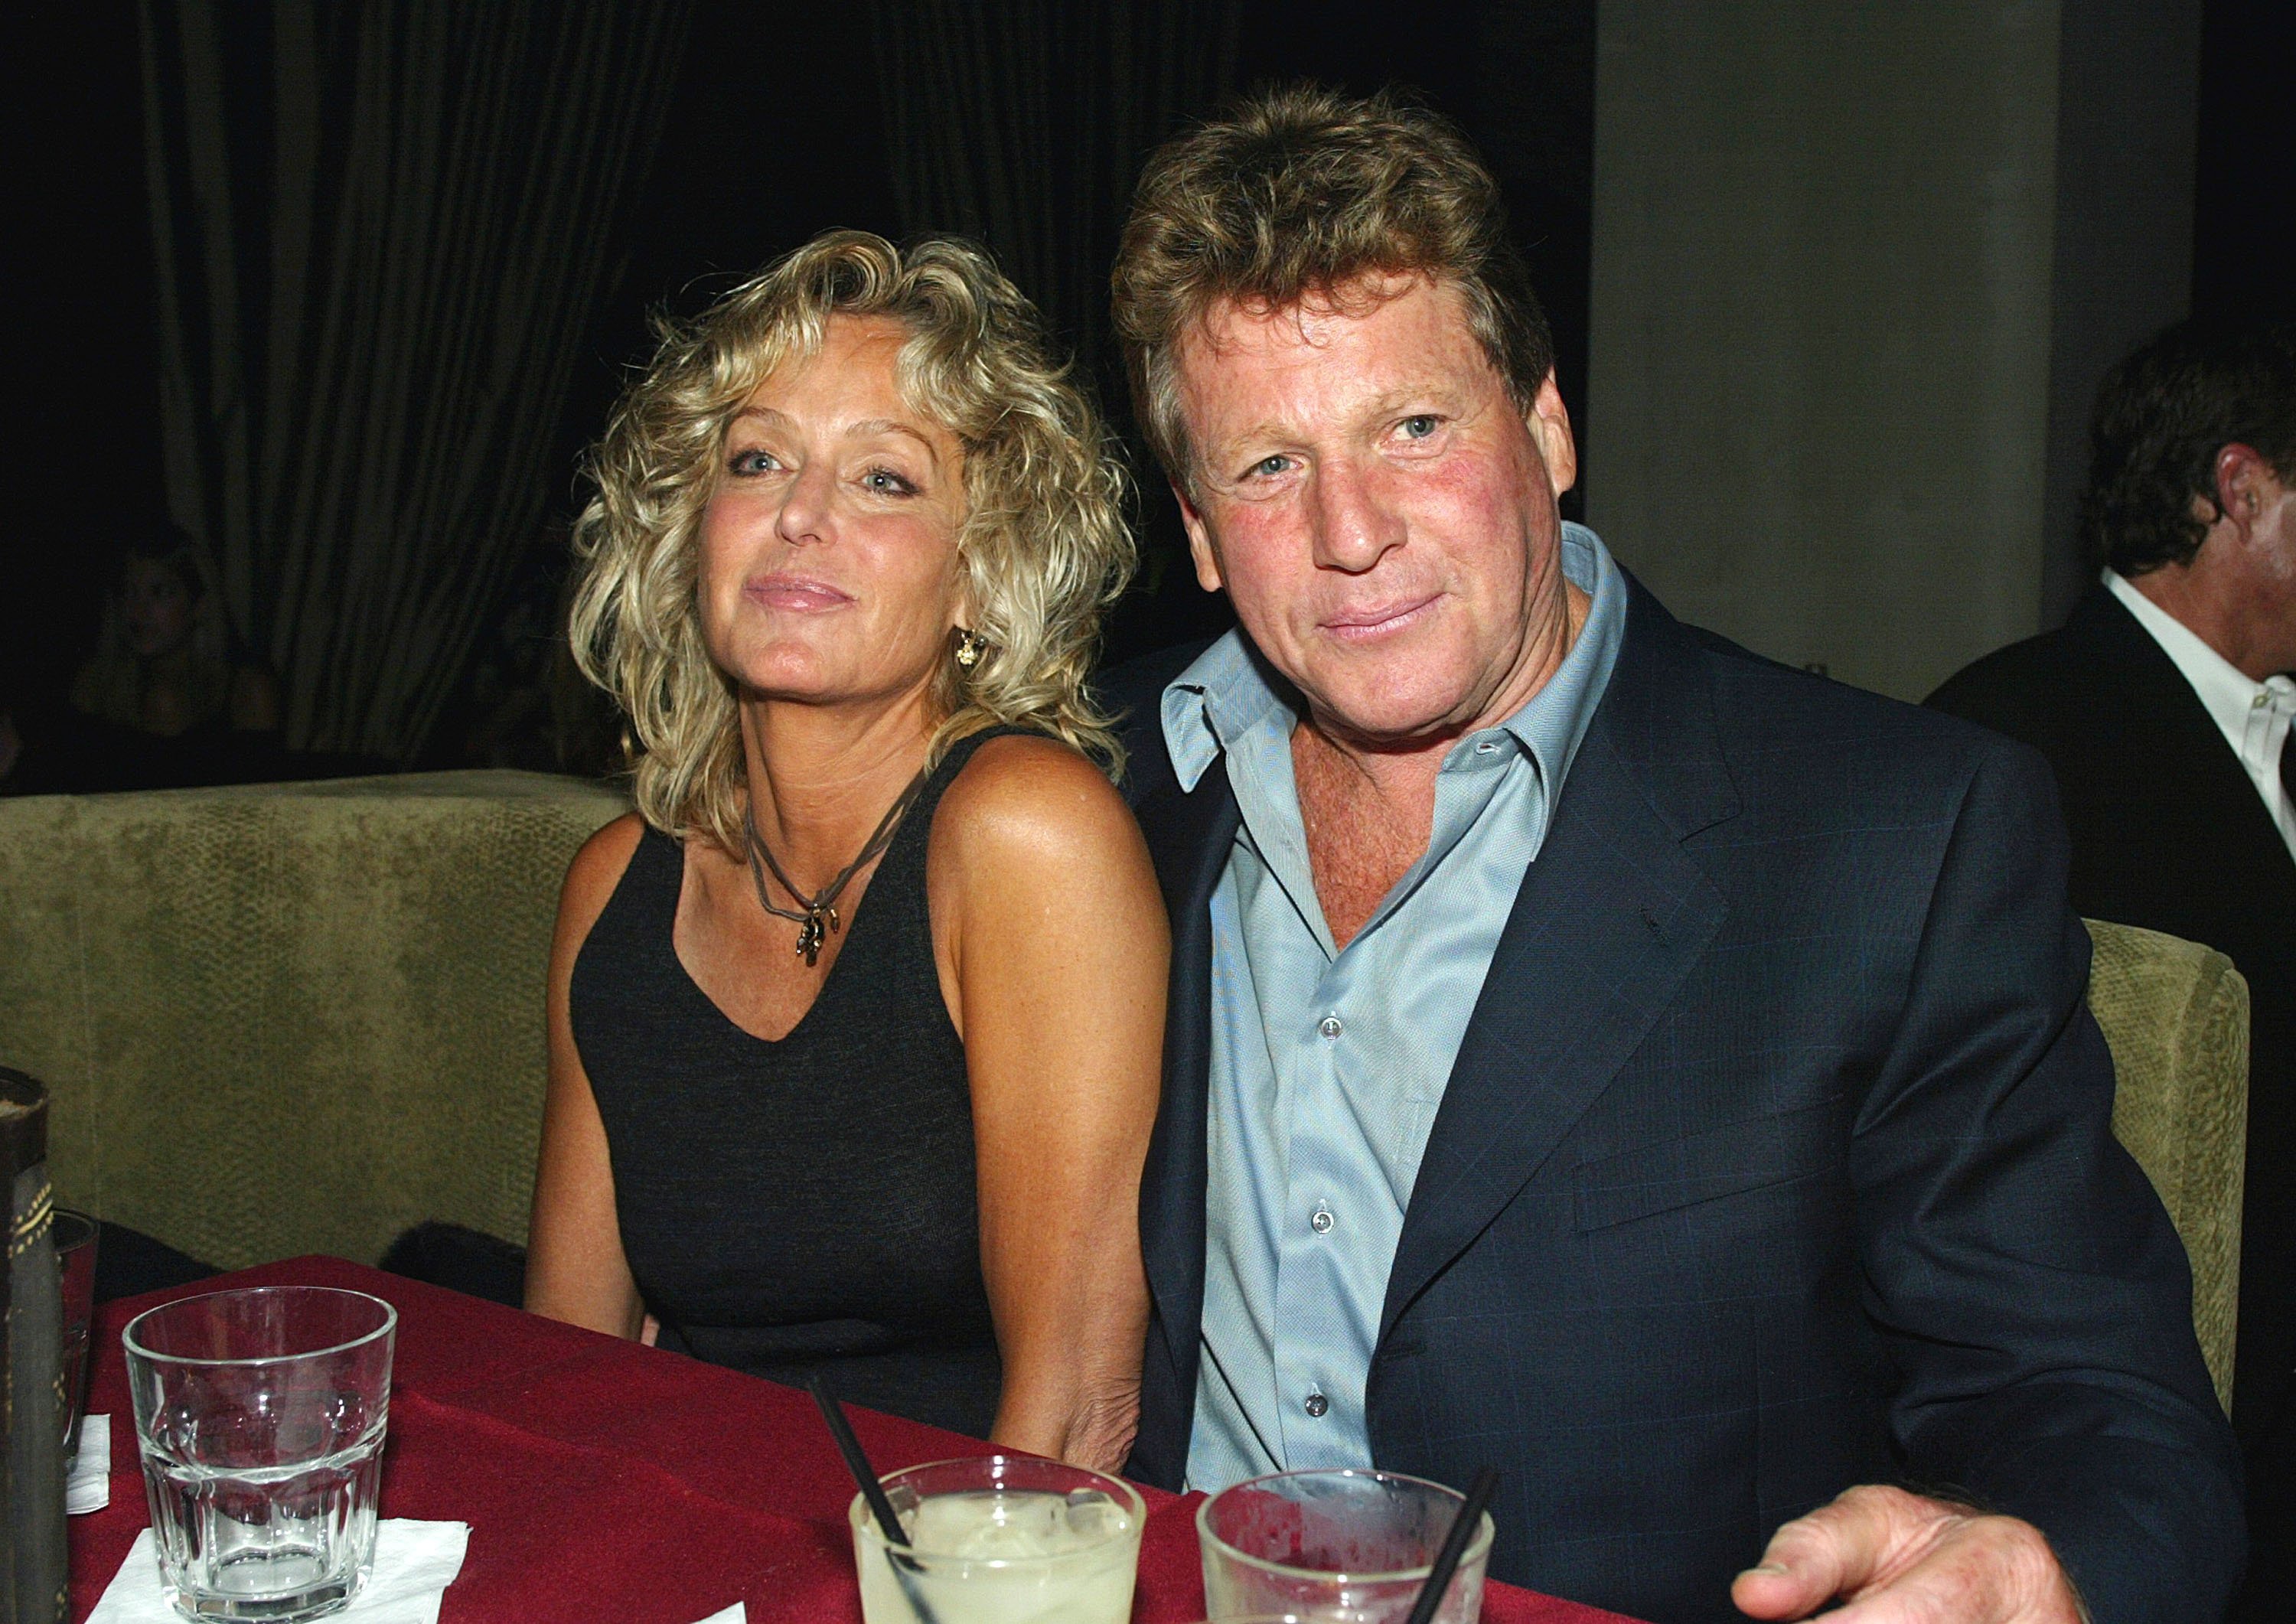 Actors Farrah Fawcett (L) and Ryan O'Neal relax at the after-party for "Malibu's Most Wanted" at the Highlands on April 10, 2003, in Los Angeles, California. | Source: Getty Images.